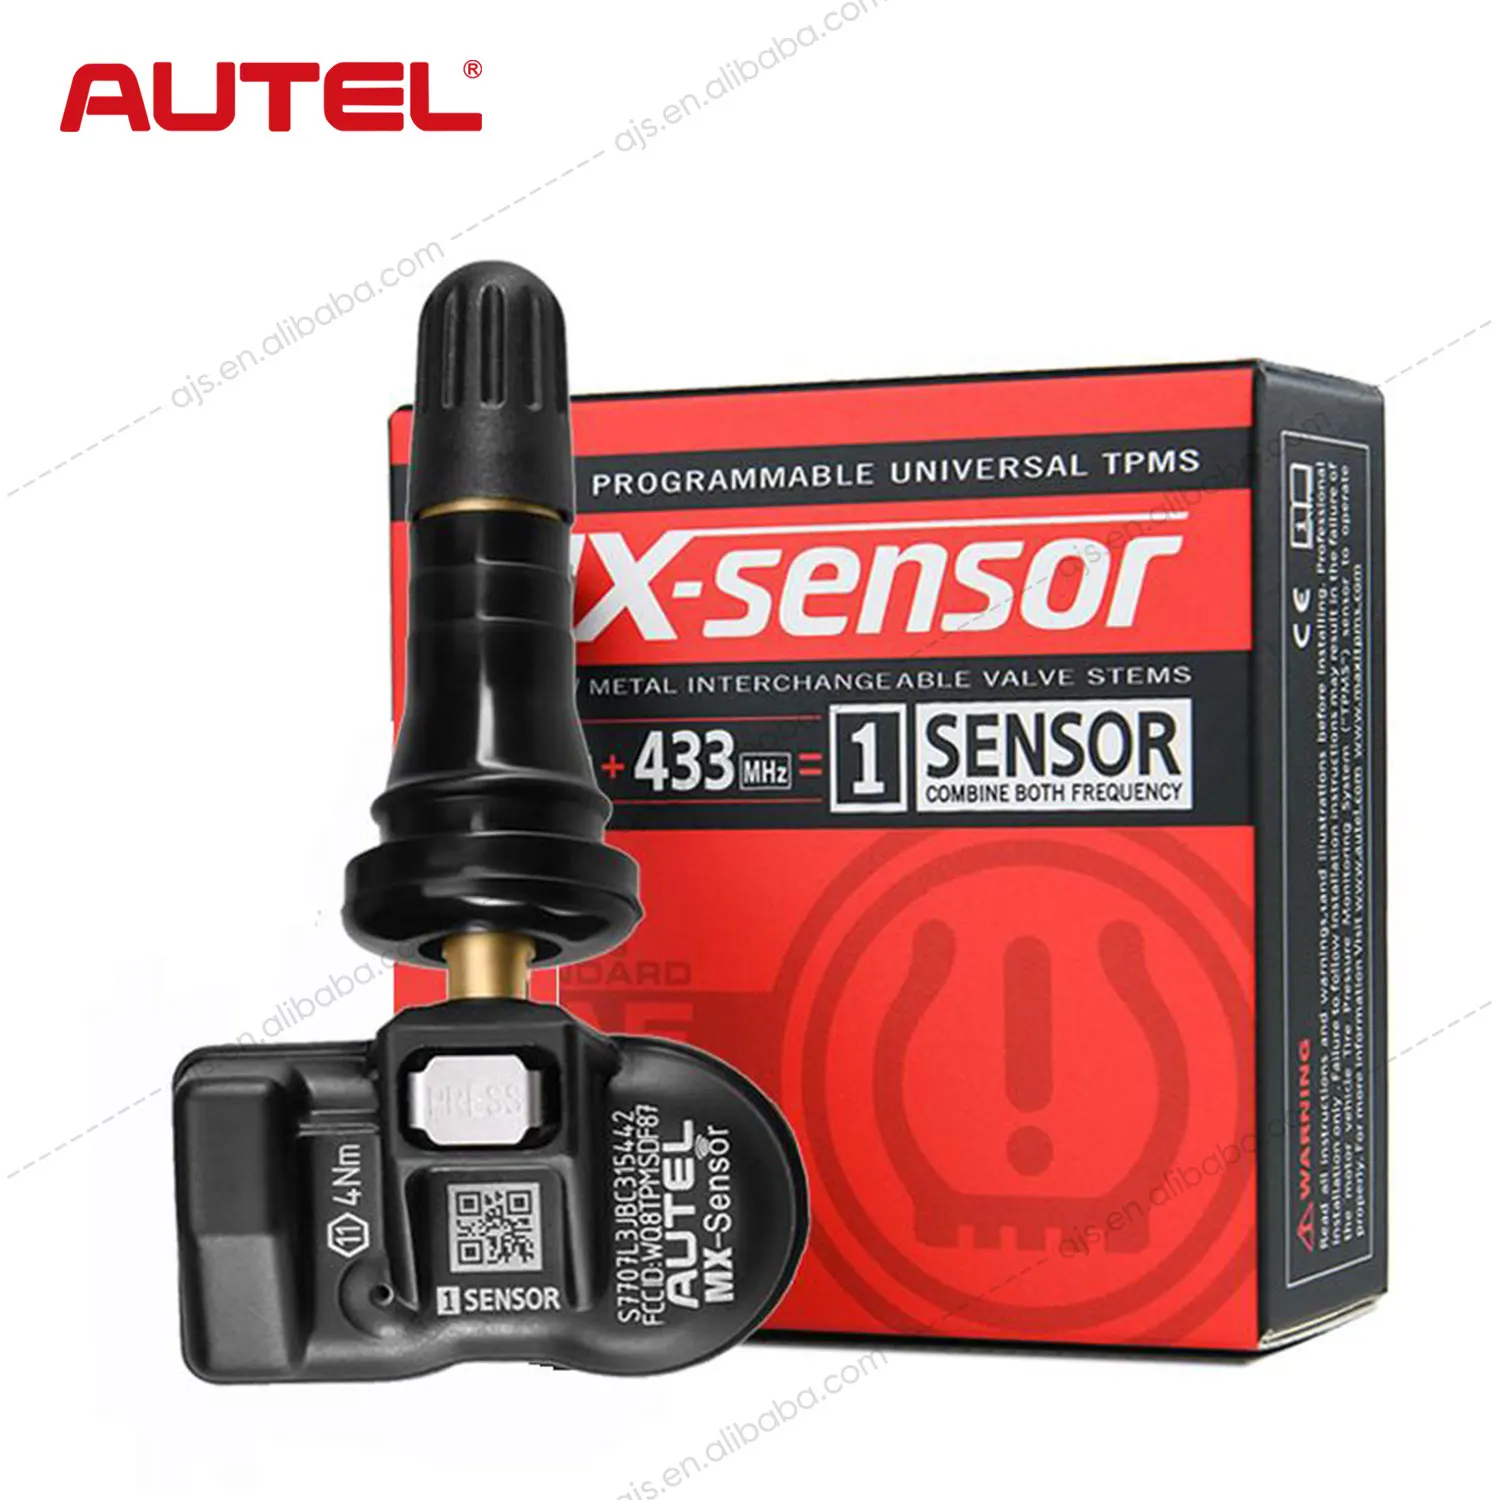 

Autel MX Sensor R Rubber 433MHz & 315MHz 2in1 Tire Pressure Monitoring System Altar Universal Auto TPMS Tire Gauge For All Cars